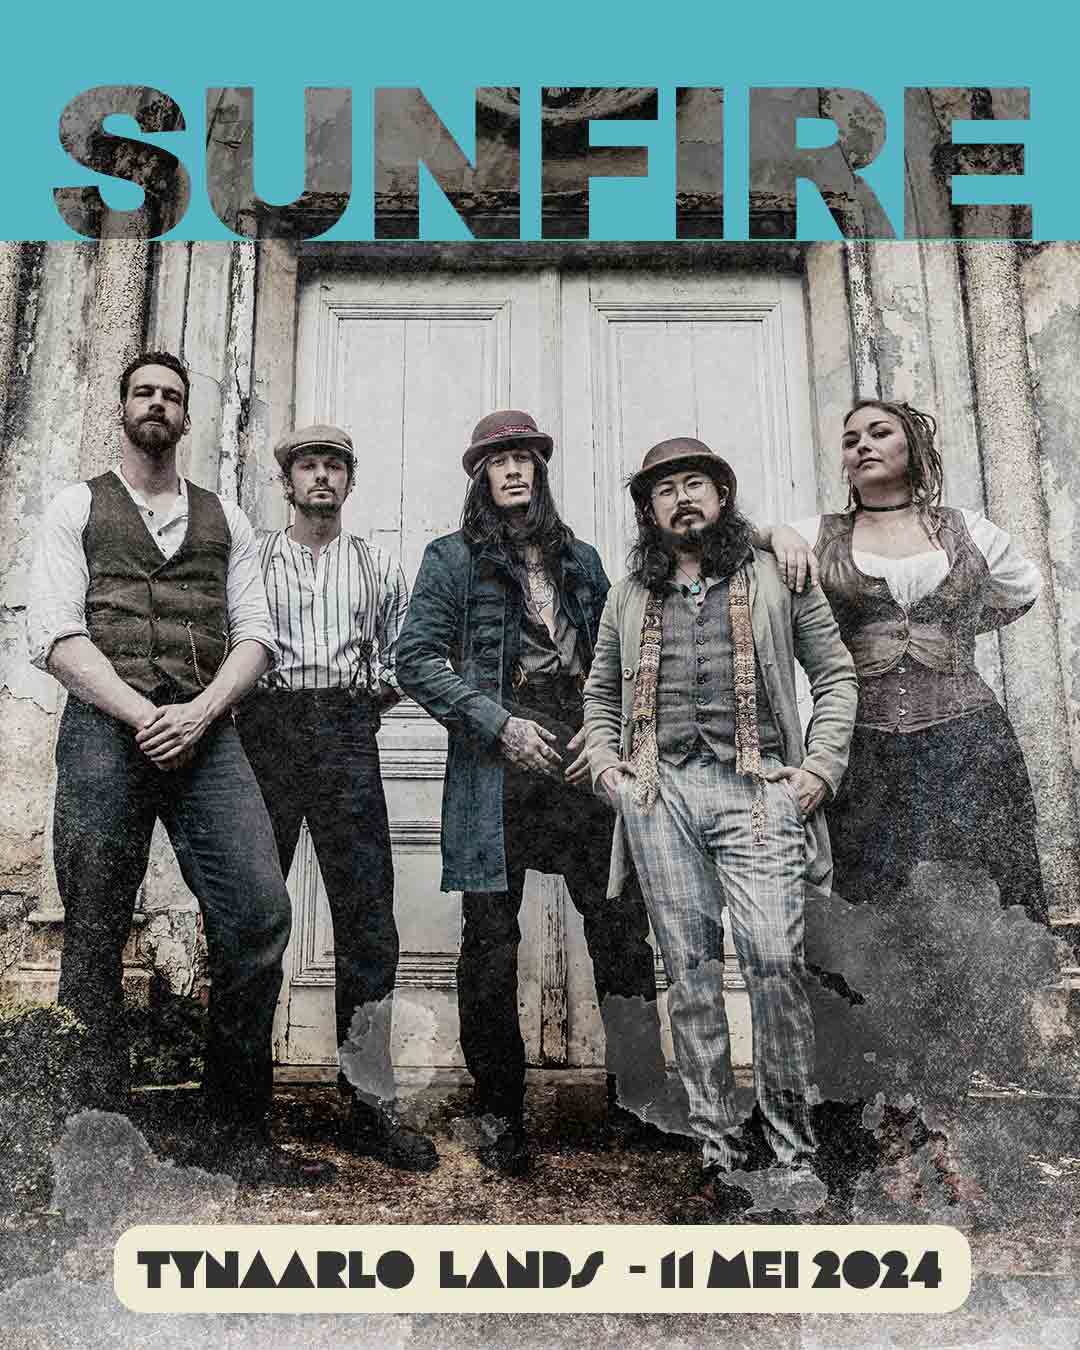 Come and see Sunfire perform live on Tynaarlo Lands